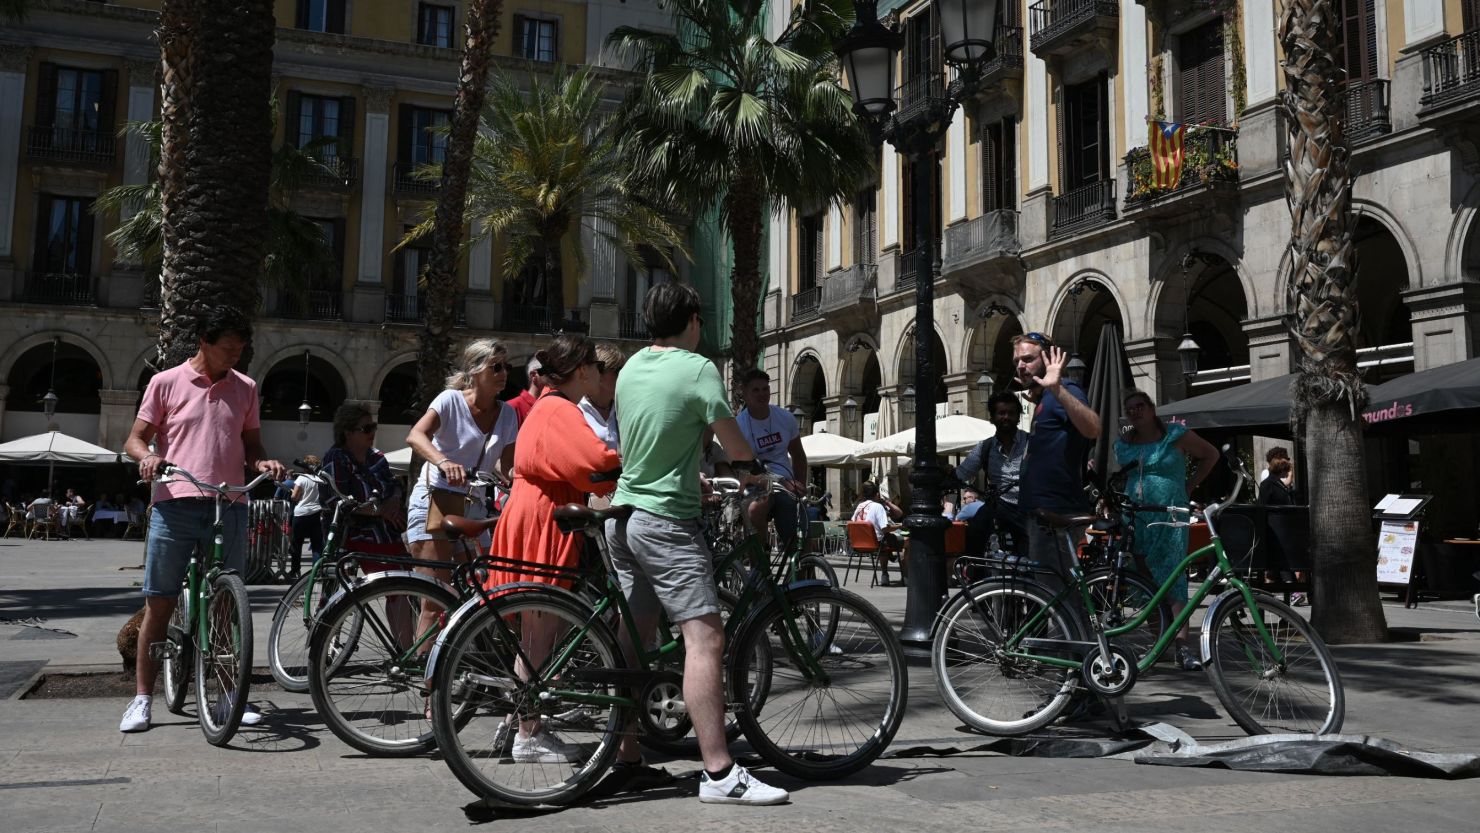 Tourists on bicycles listen to a tour guide at Plaza Real in Barcelona, on May 11, 2022.